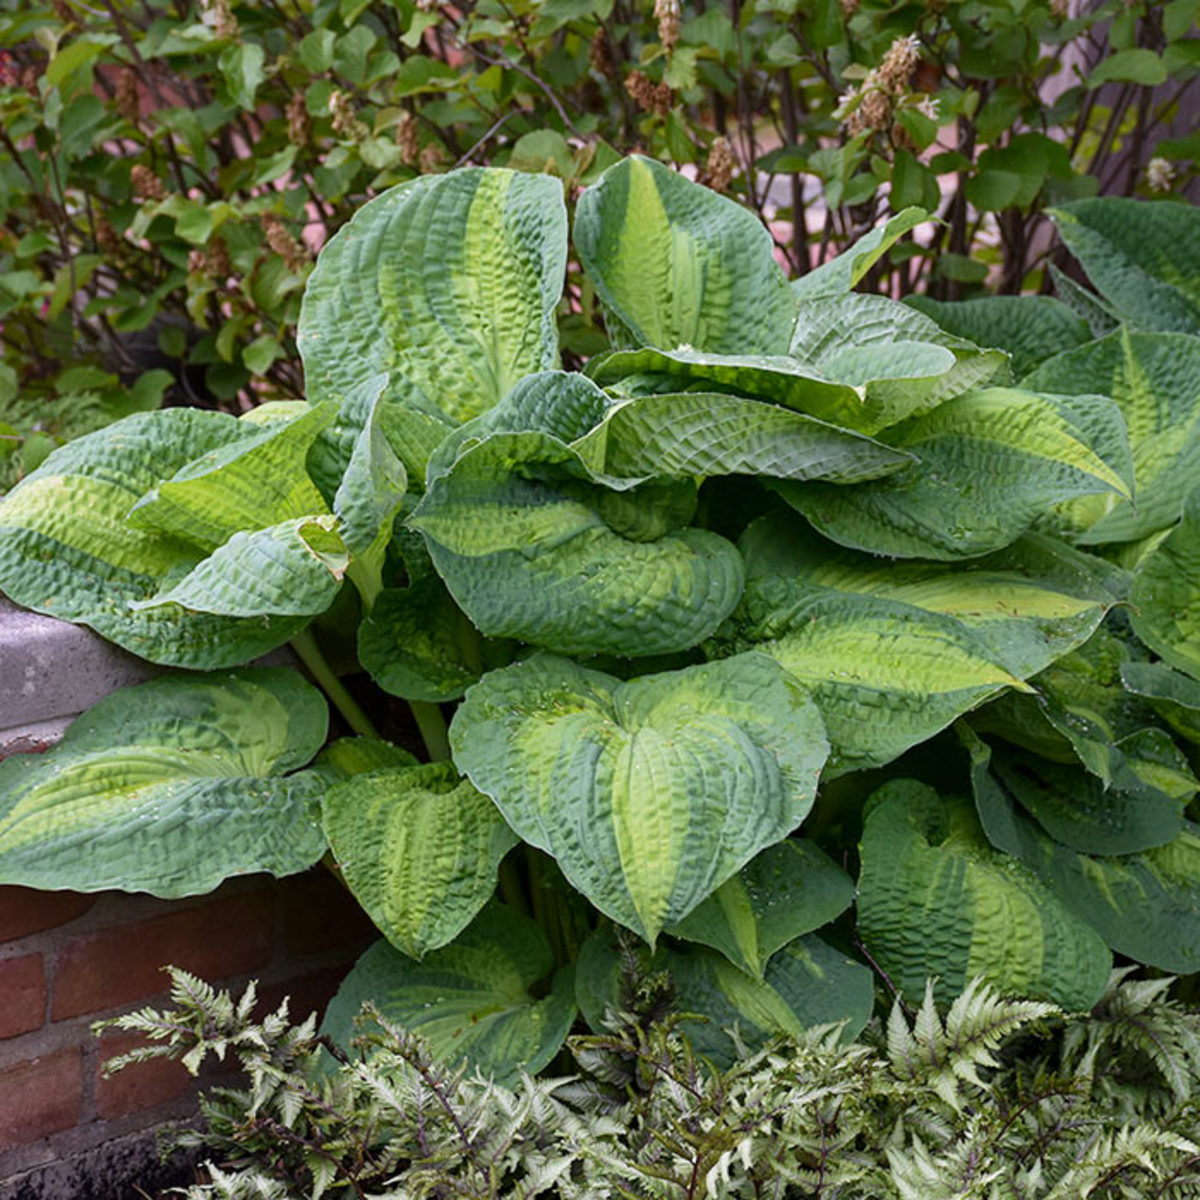 The leaves of 'Brother Stefan' hosta have a remarkable seersucker texture.